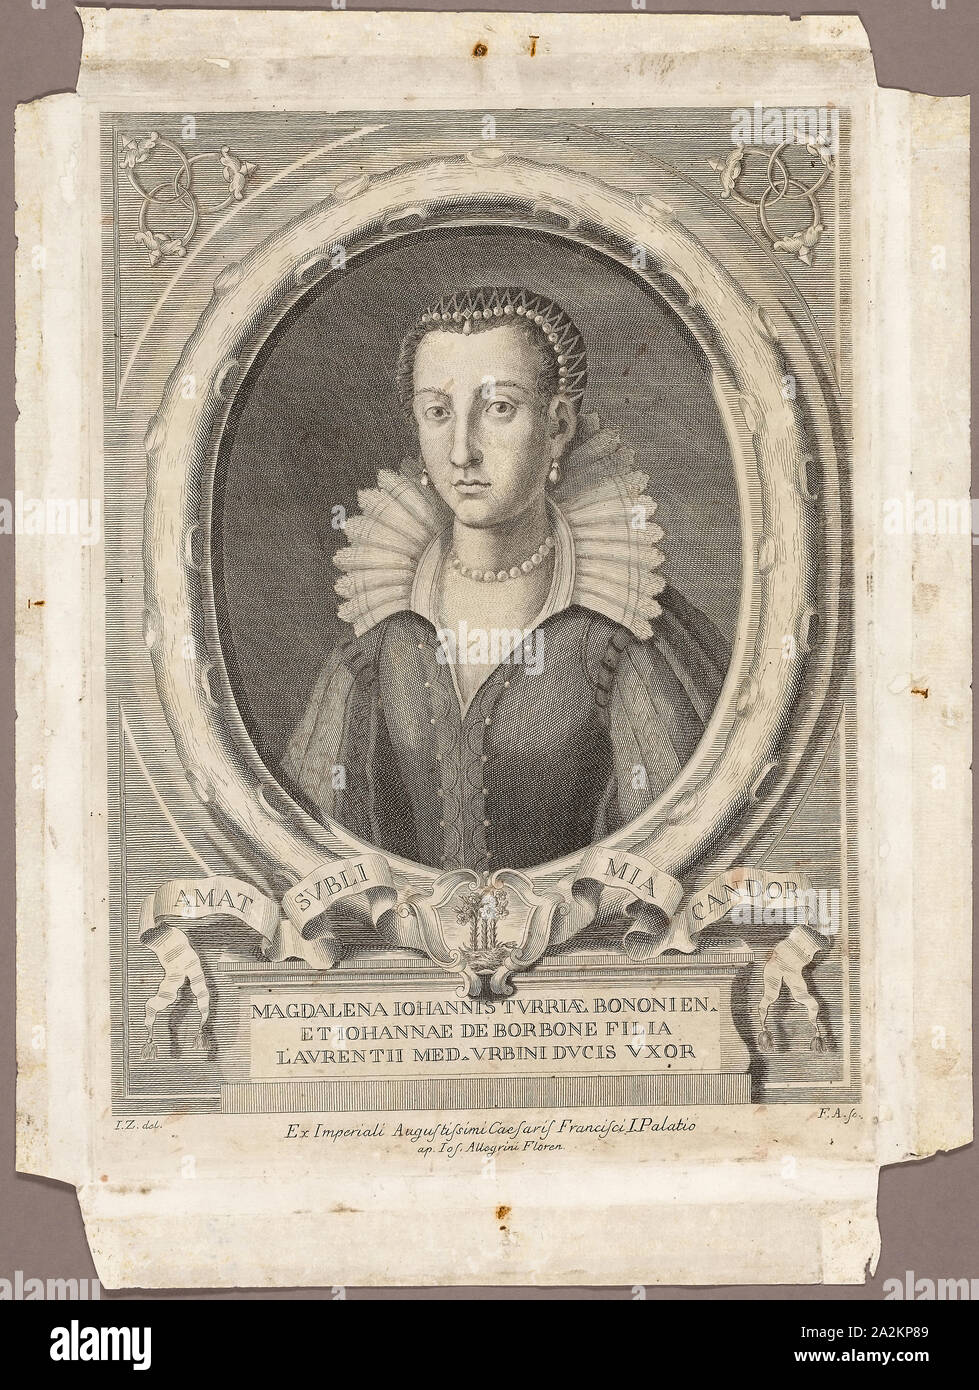 Madeleine de la Tour d’Auvergne, published 1761, F.A. (German?, active 18th century), after I.Z. (German?, active 18th century), published by Giuseppe Allegrini, Florence, 1761, Germany, Engraving on ivory laid paper, 354 × 256 mm (plate), 418 × 314 mm (sheet Stock Photo